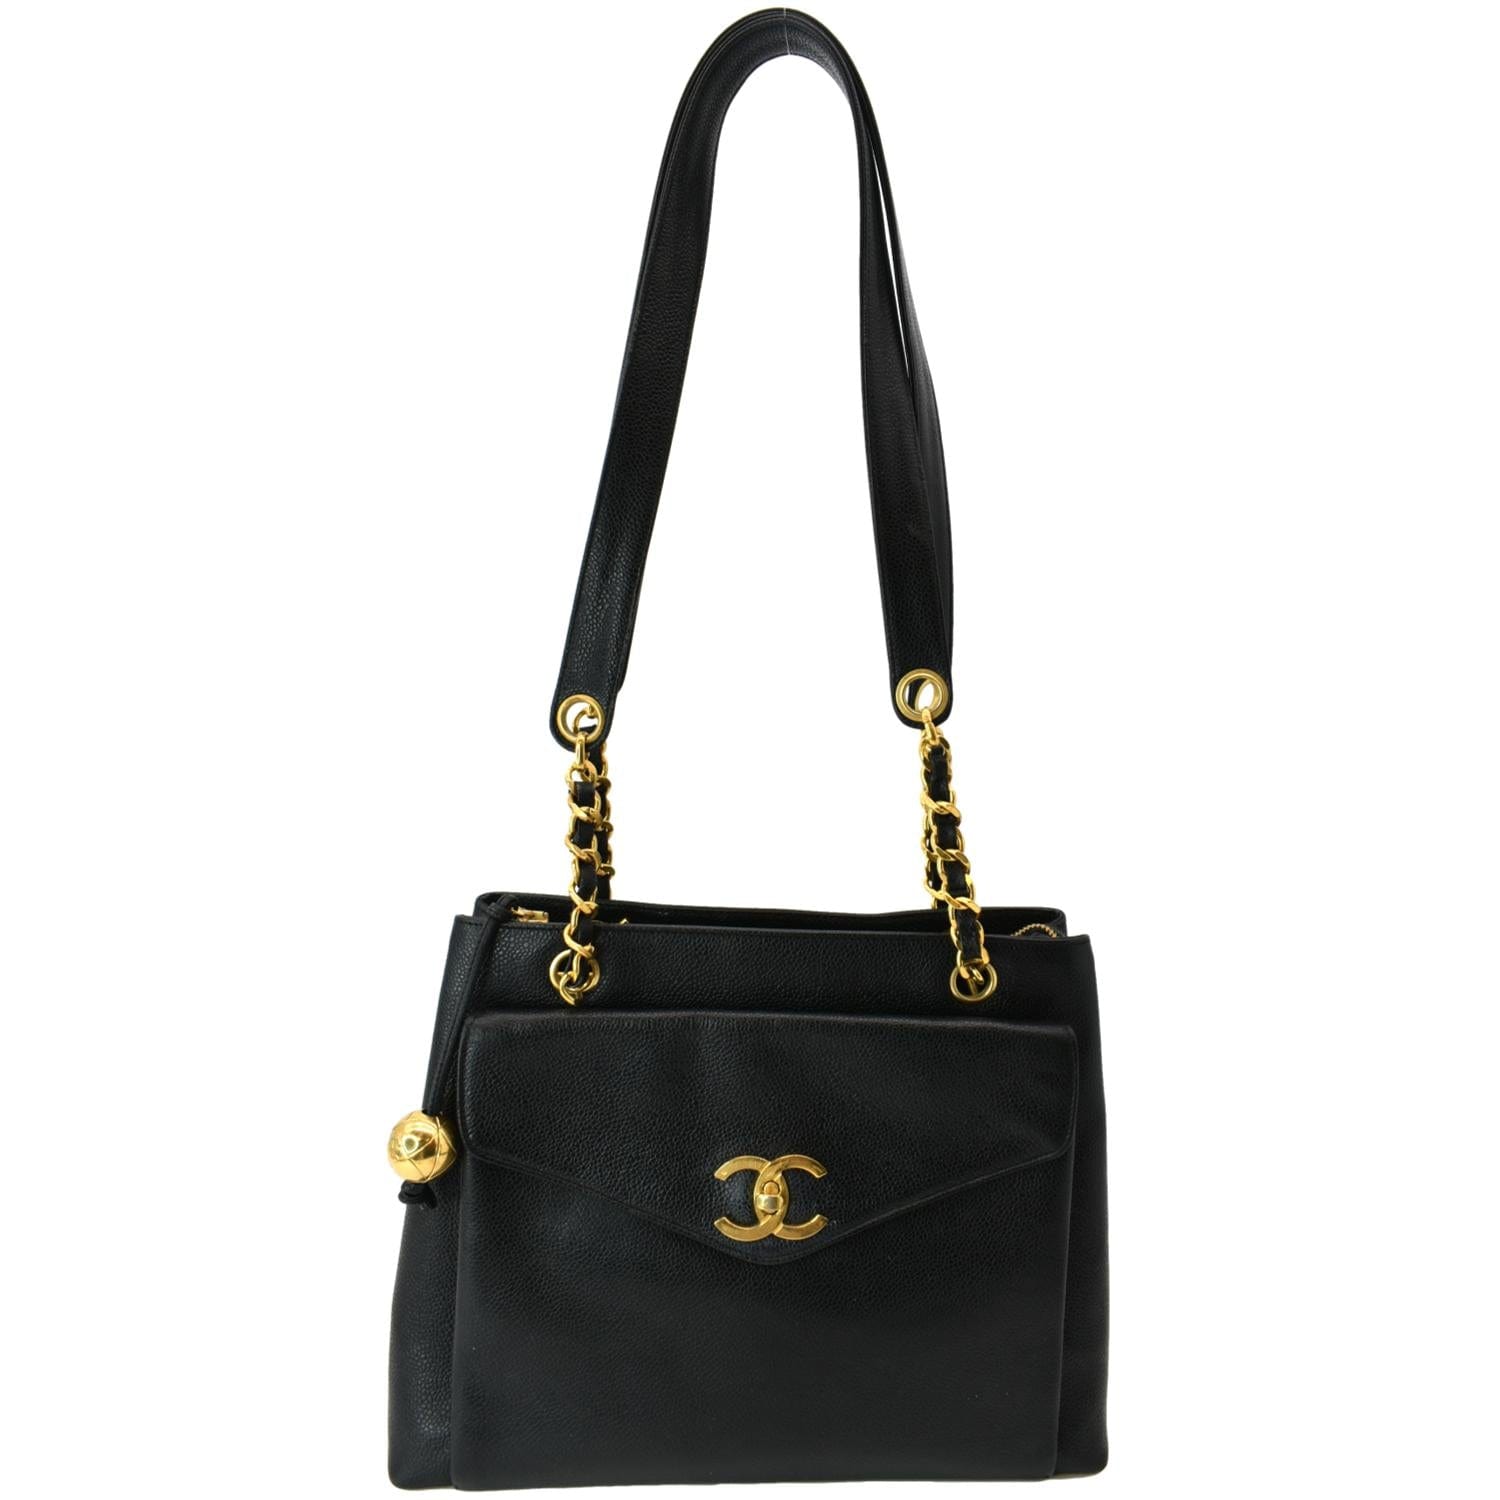 Chanel Front Flap Pocket Quilted Caviar Leather Tote Bag